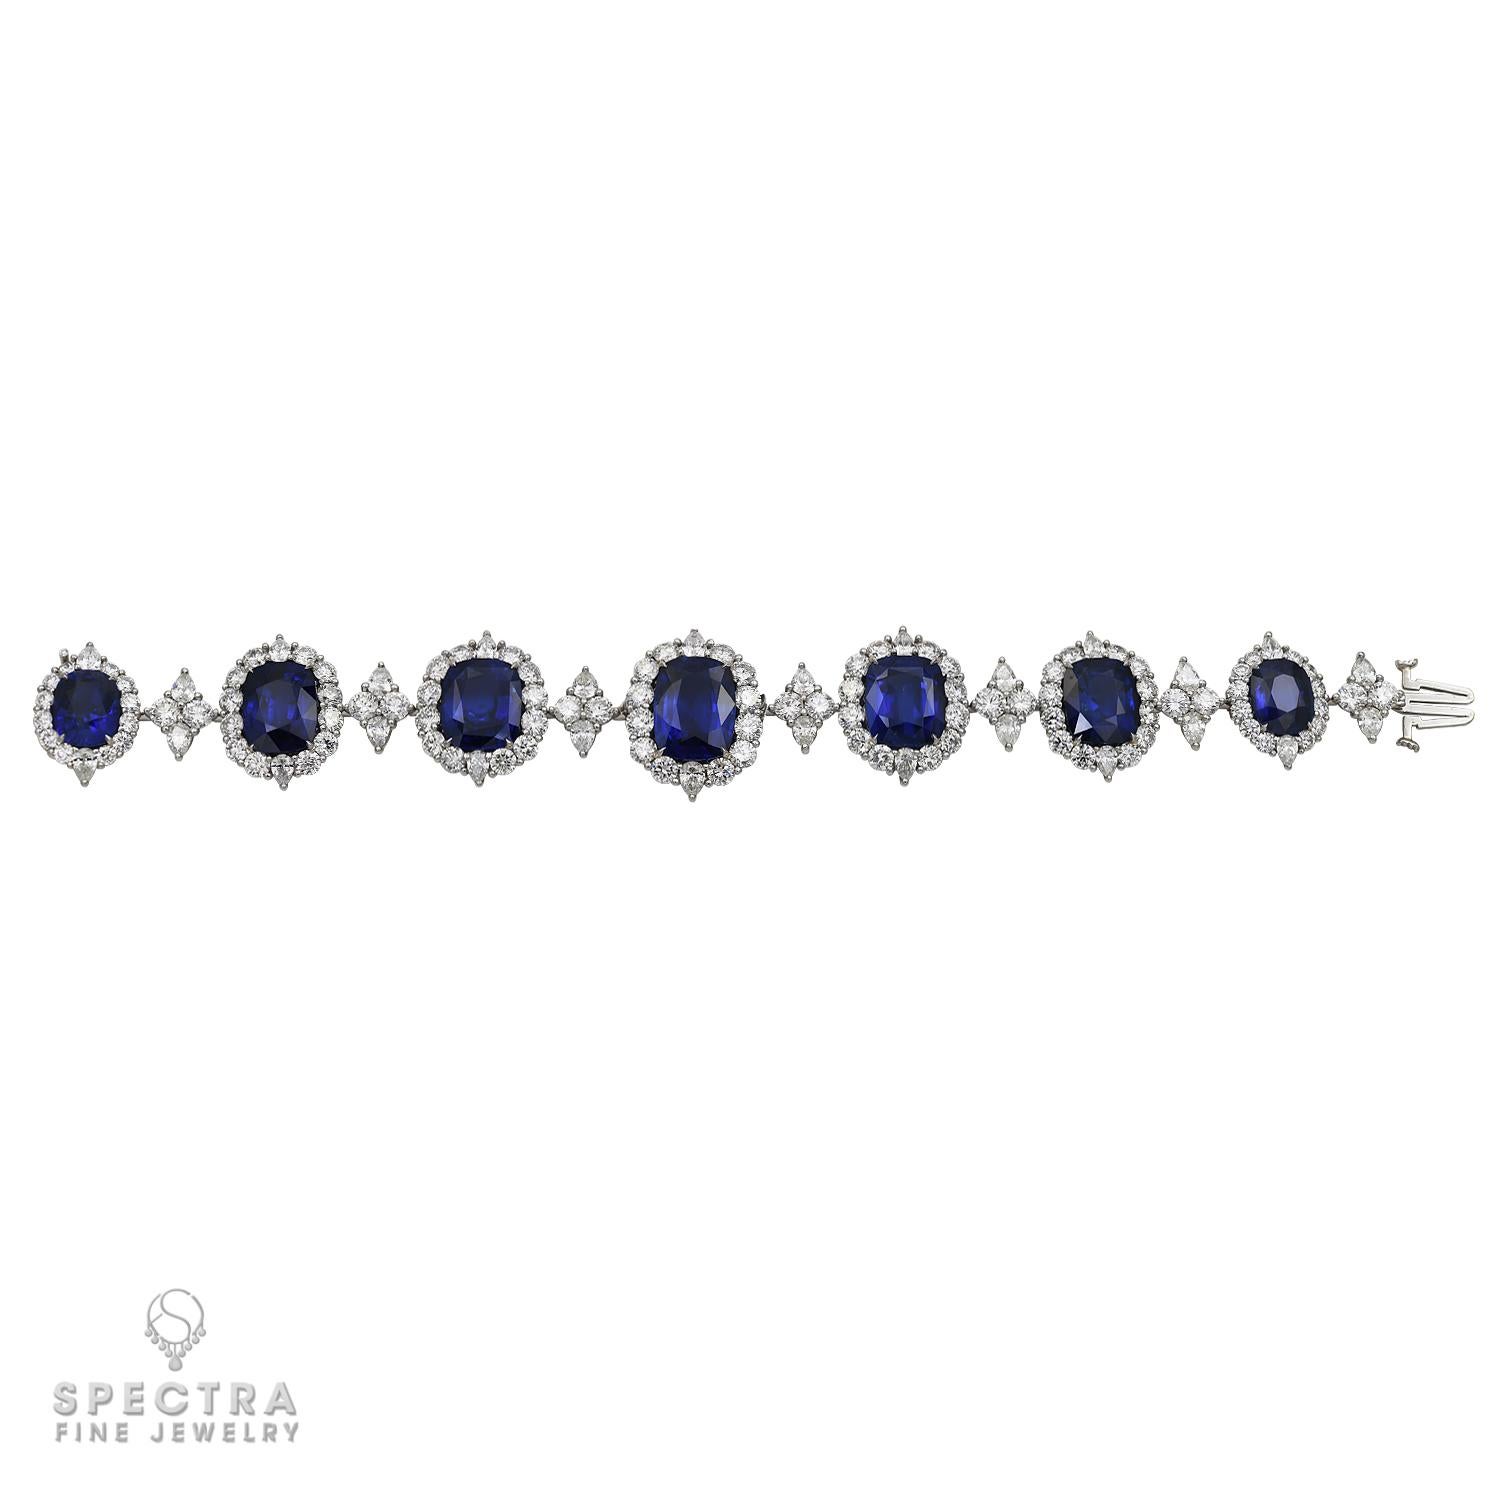 This Contemporary Sapphire Diamond Riviere Bracelet, made by Spectra Fine Jewelry in the 21st century, circa 2018, is crafted in platinum and features 7 cushion-cut Ceylon sapphires, weighing approximately 54.36 carats total. Five of the seven